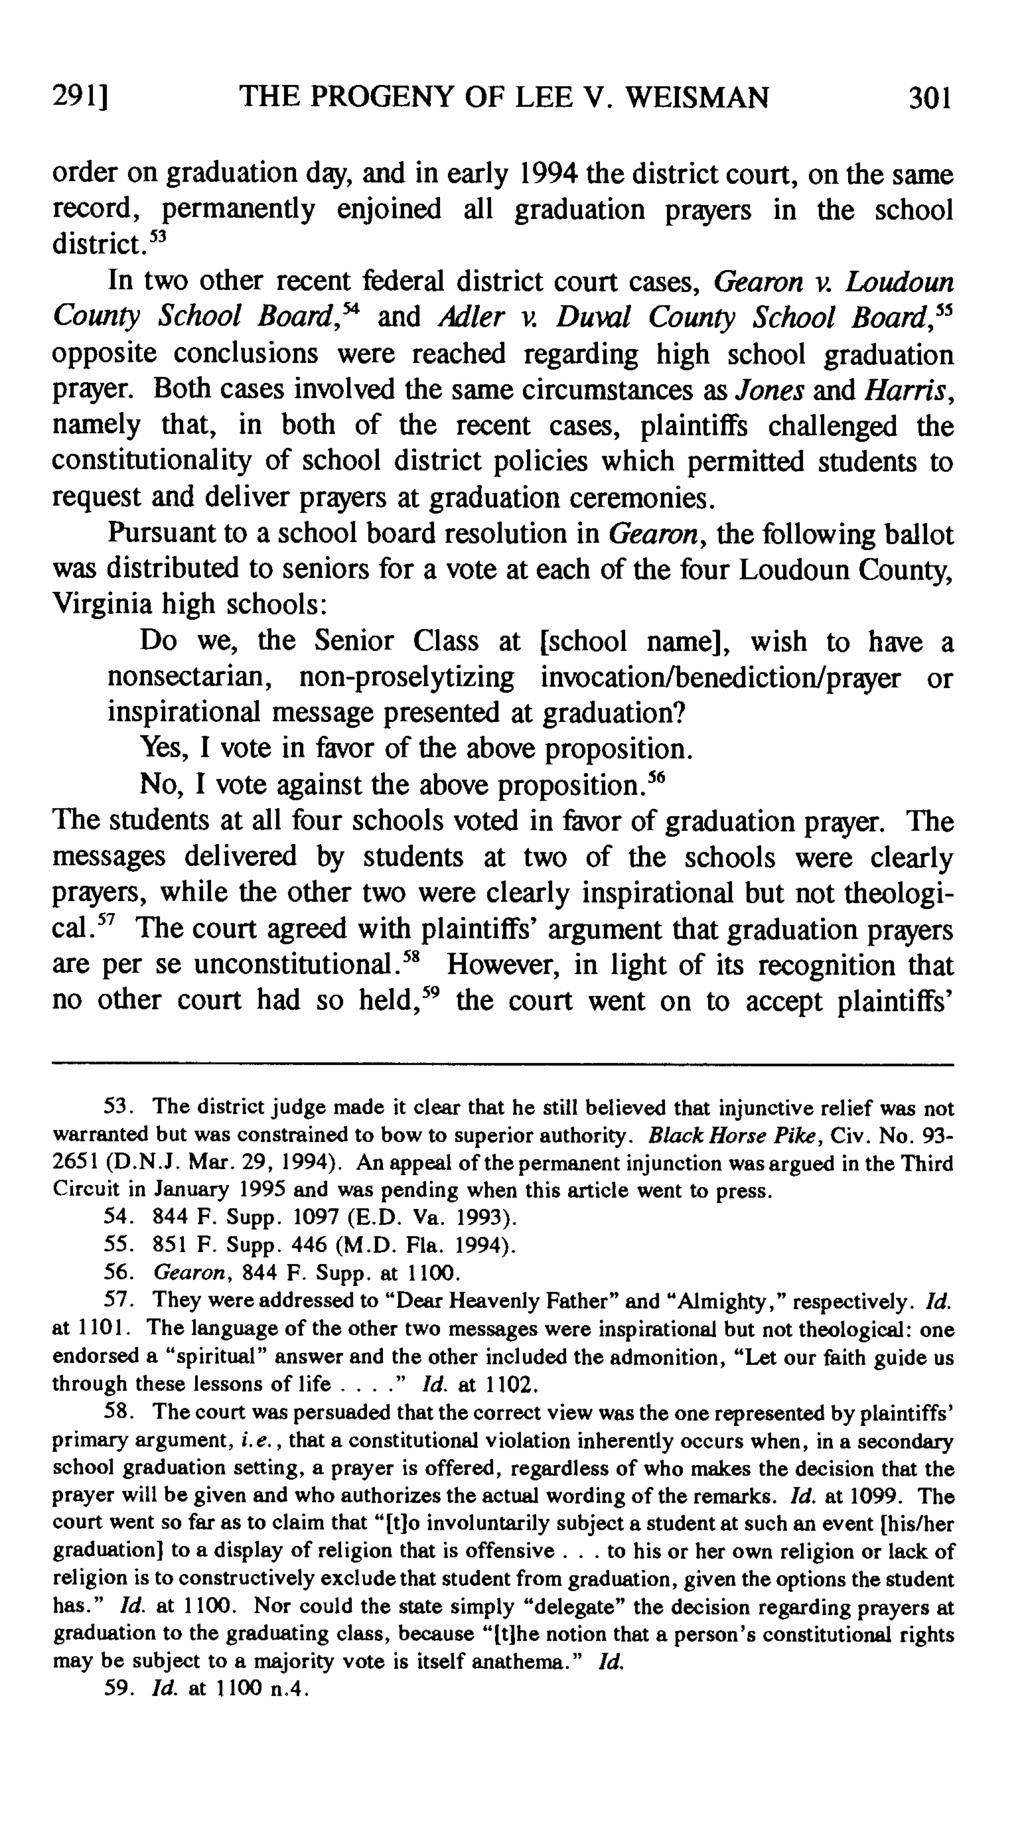 291] THE PROGENY OF LEE V. WEISMAN 301 order on graduation day, and in early 1994 the district court, on the same record, permanently enjoined all graduation prayers in the school district.